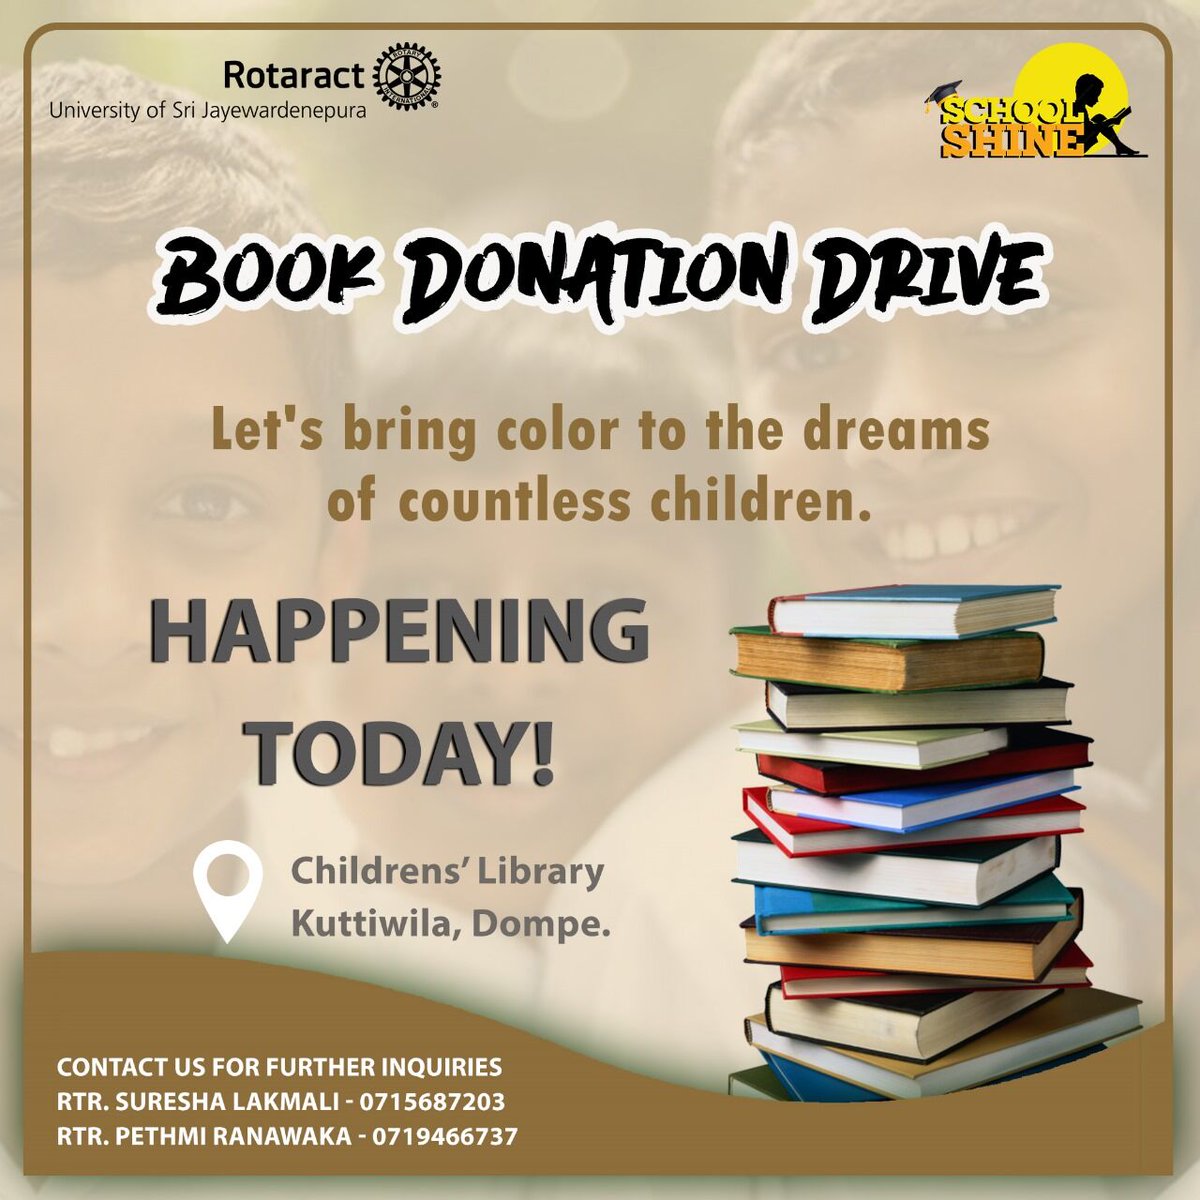 Donate new or gently used books to the new children's library in Kuttiwila, Dompe. Your generosity will light up their world with knowledge and wonder.📚✨

#SchoolShine #CommunityService #RACUSJ #Rotaract #Rotaract3220 #CreateHopeintheWorld #YouthForAll